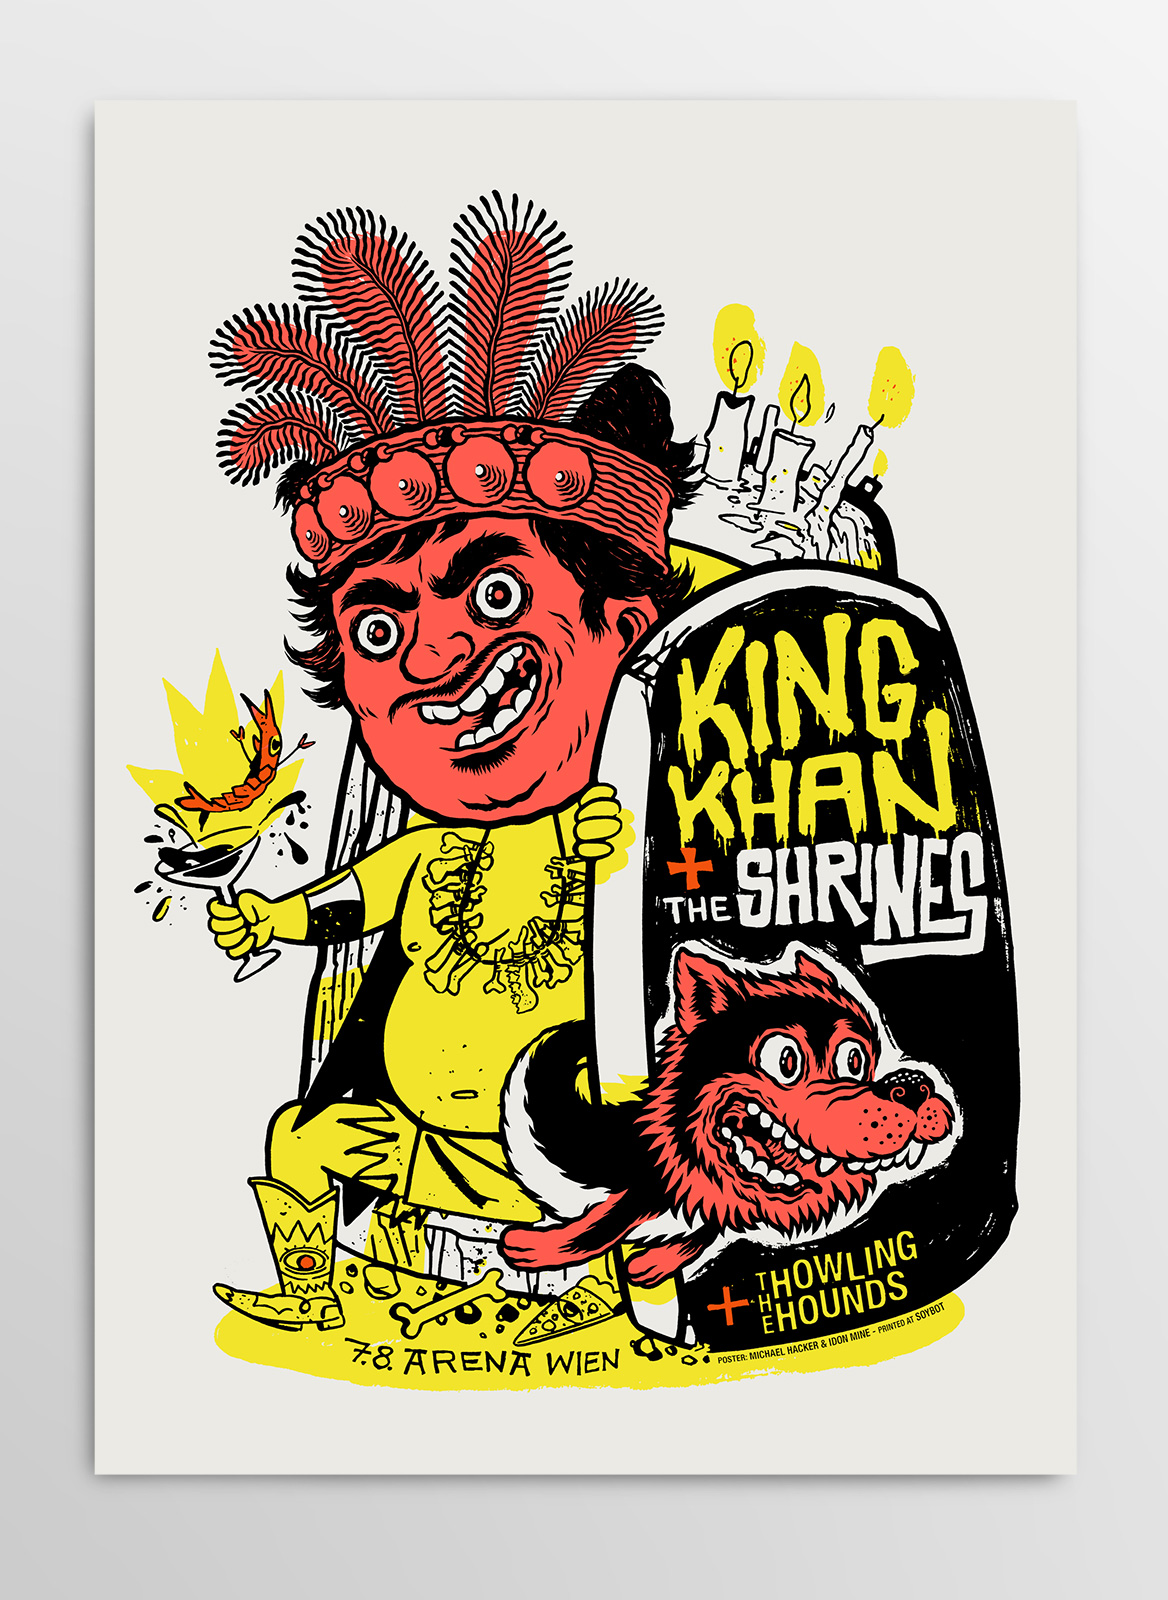 King Khan and the Shrines Gigposter by Michael Hacker and Idon Mine